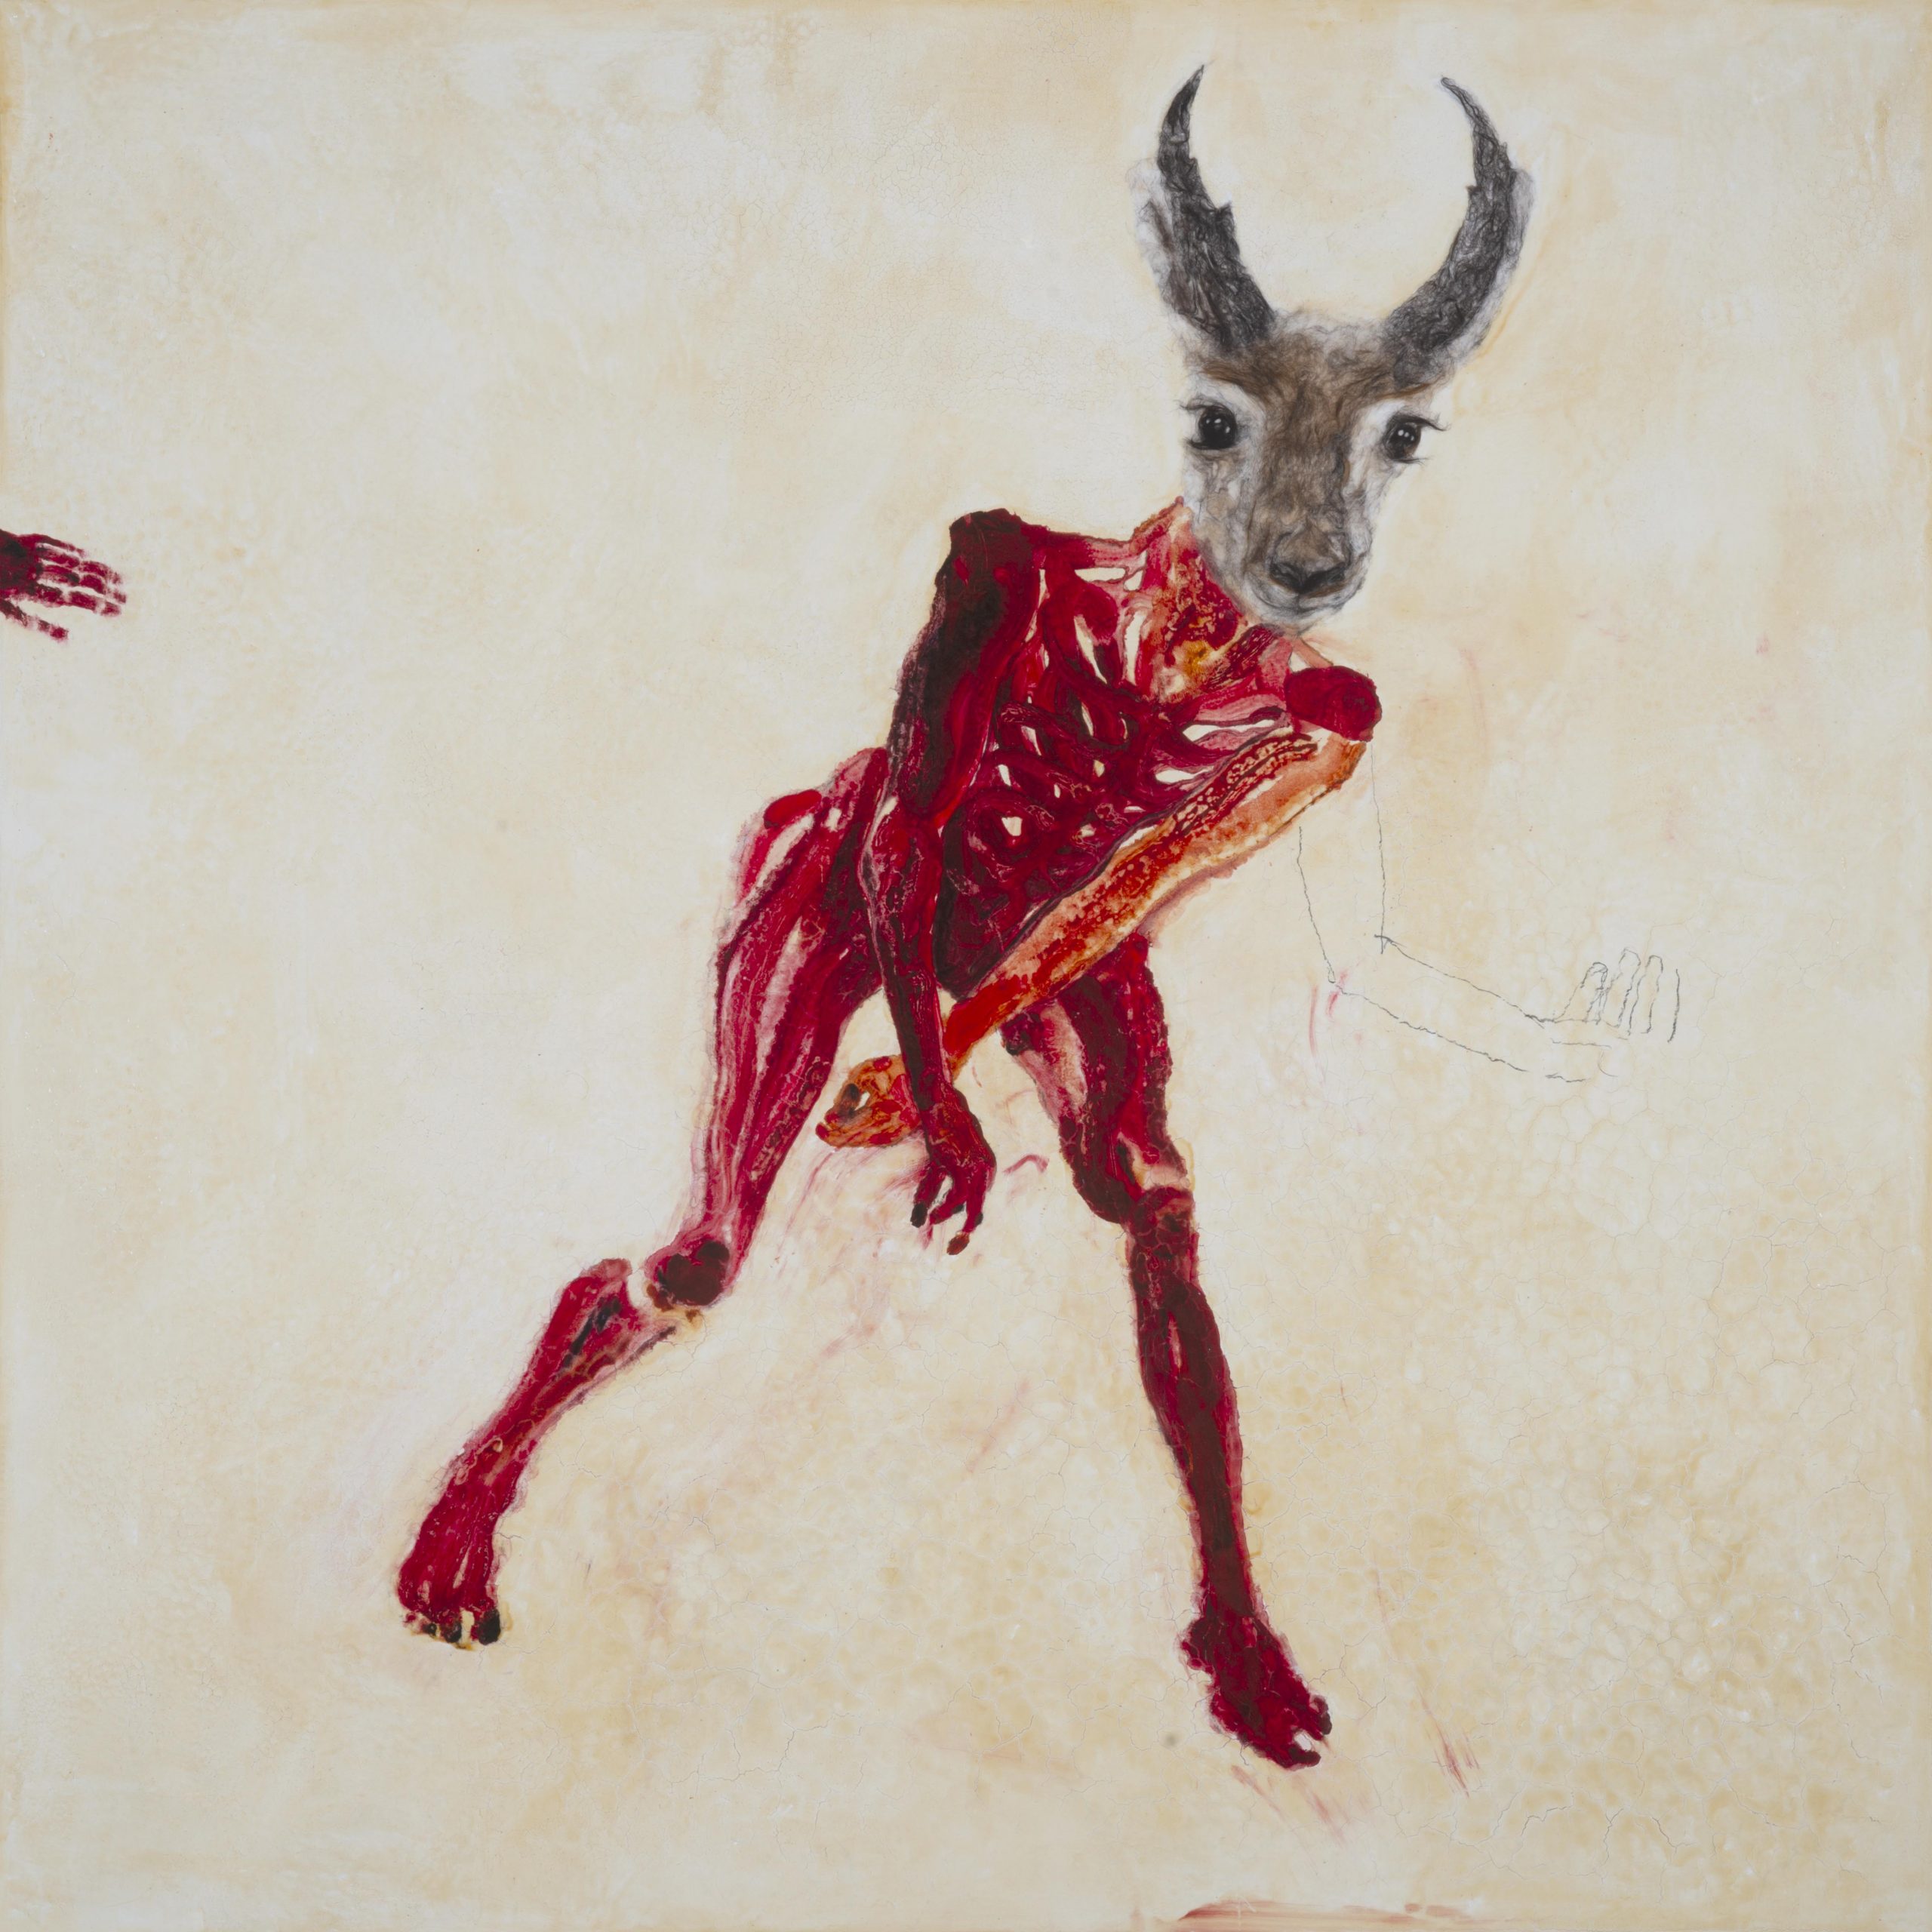 A painting of a red deer with horns